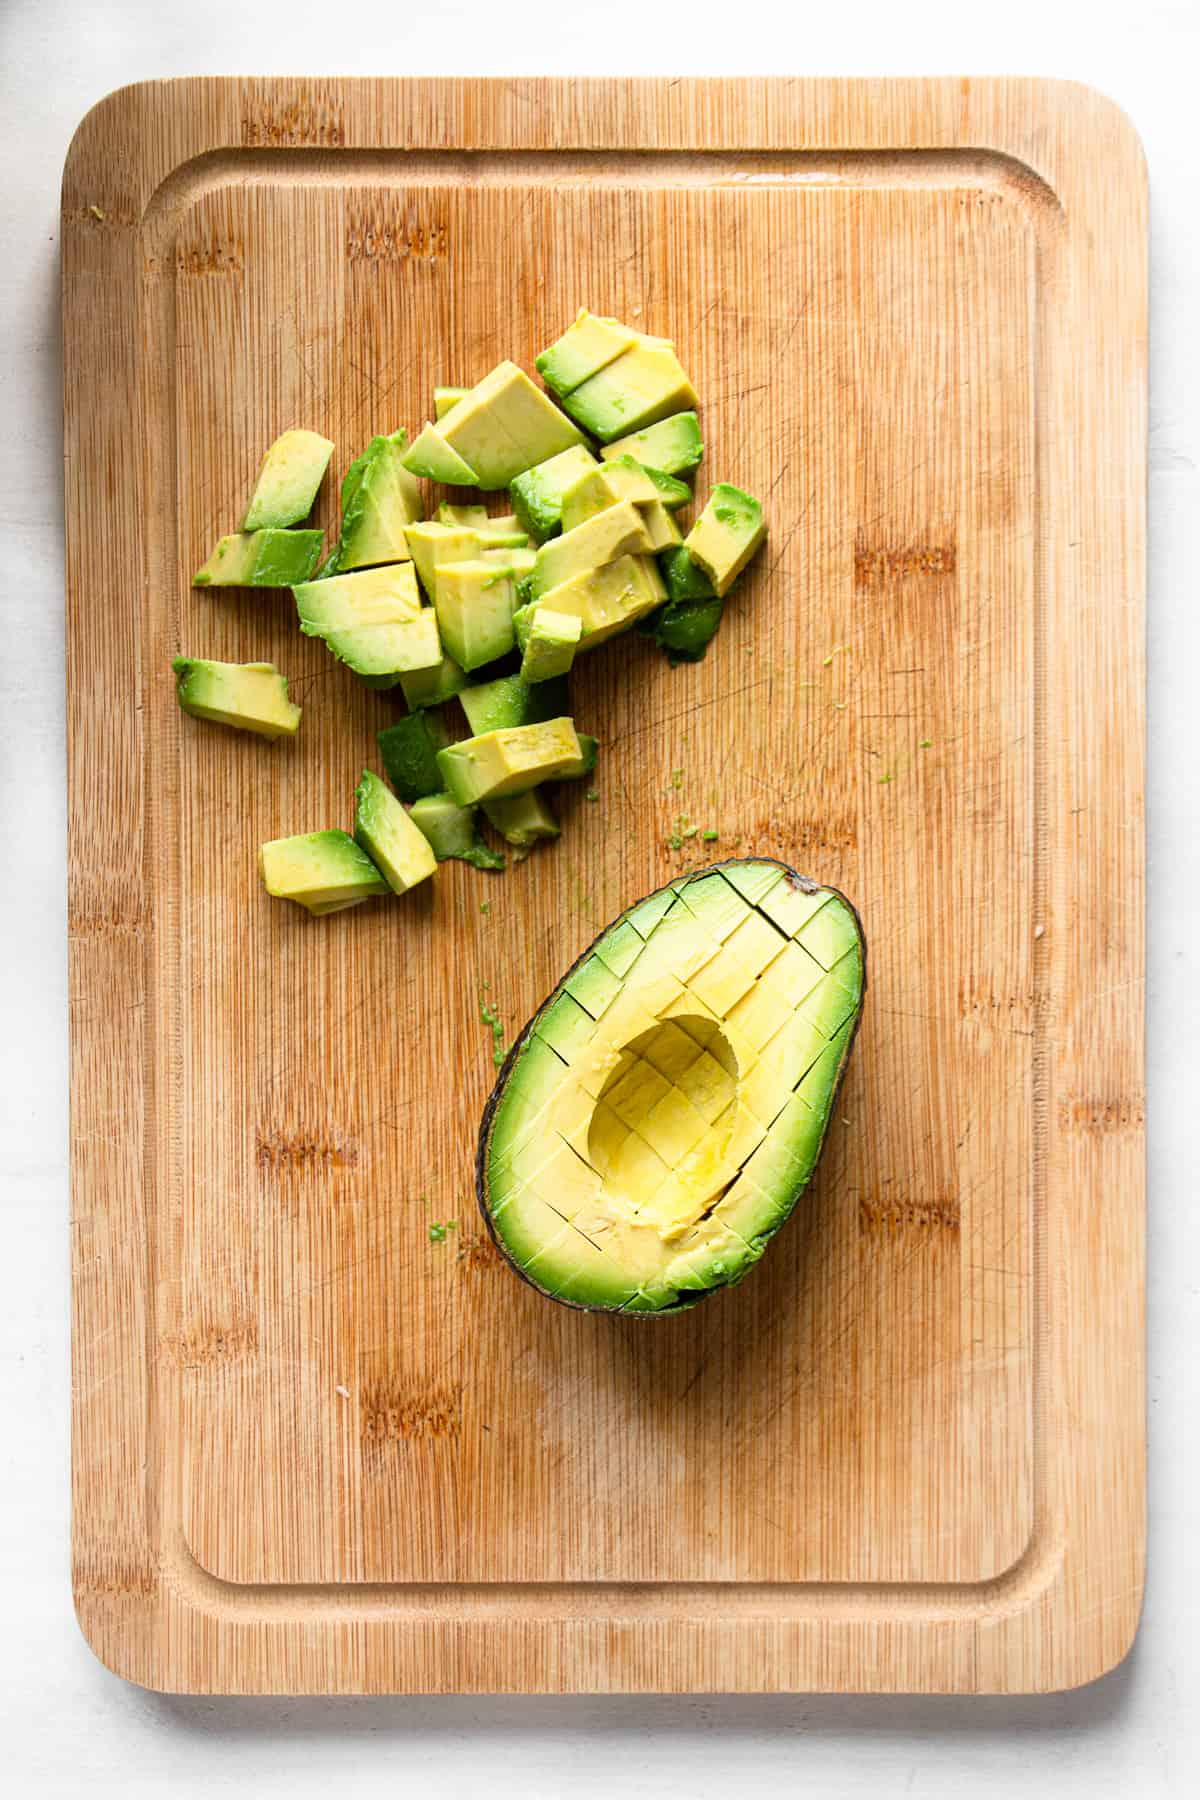 Pitted avocado and small avocado pieces on a wooden board.